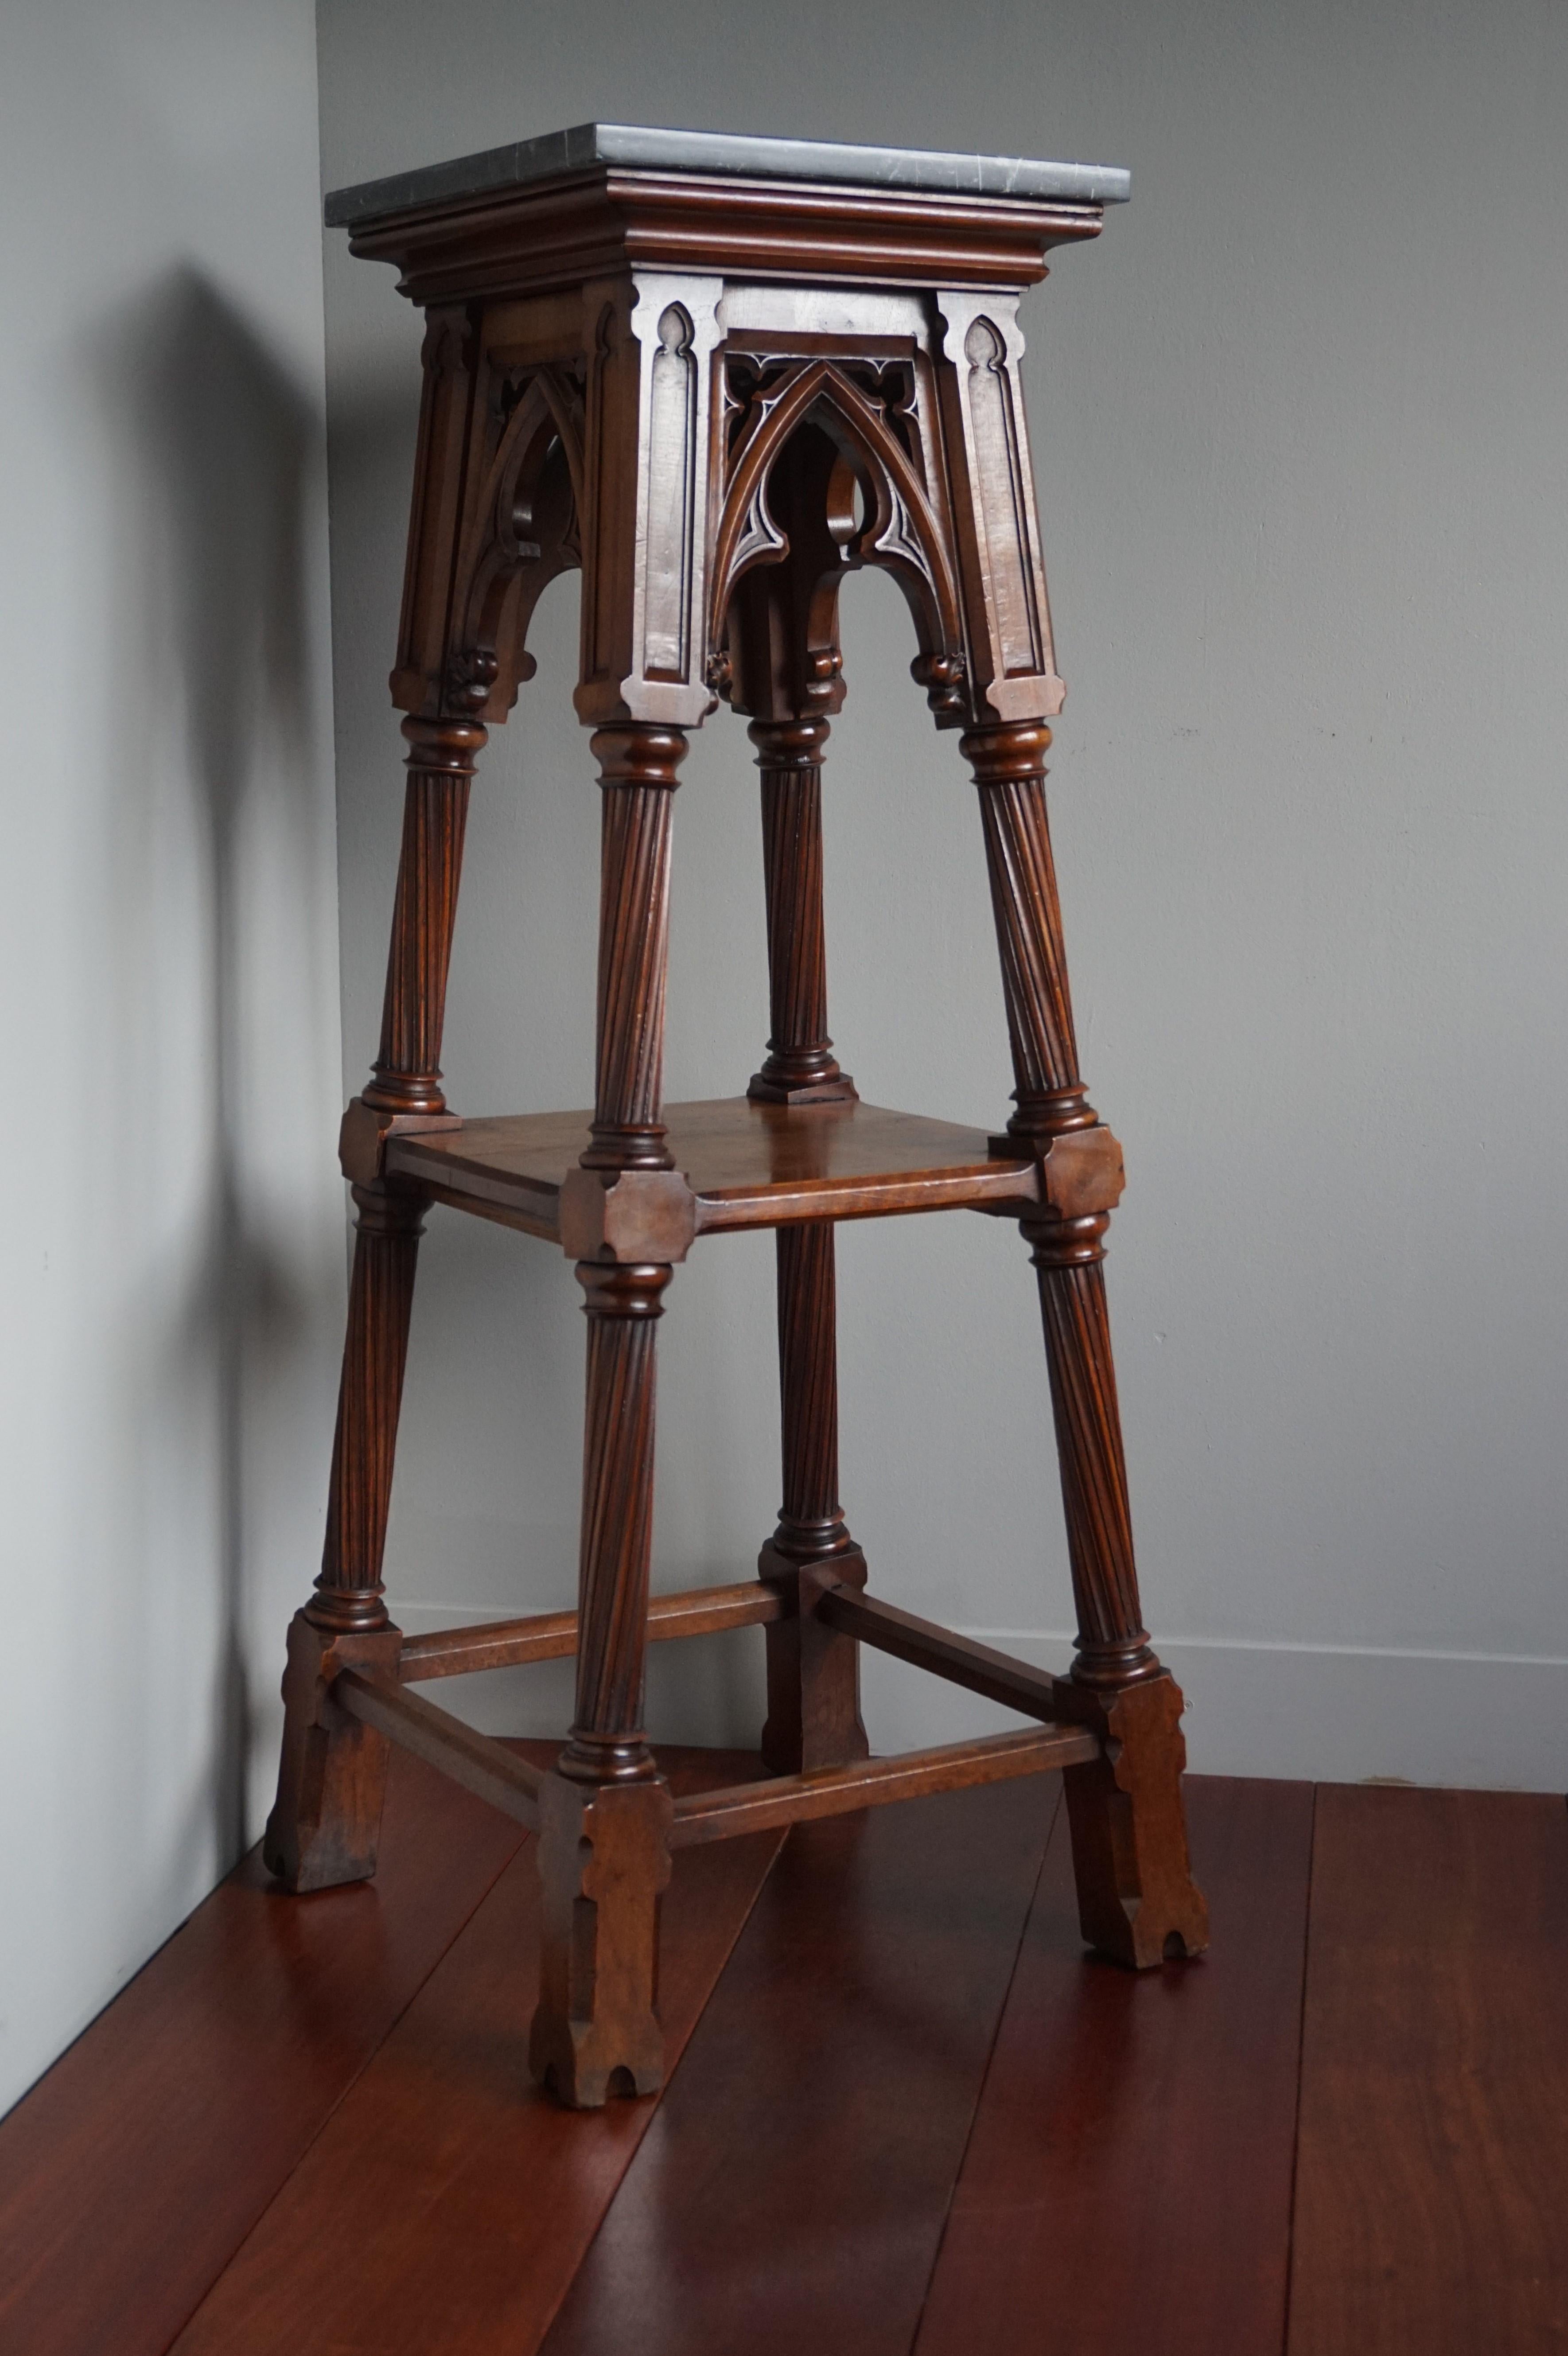 Superb quality and very good condition Gothic stand with an amazing patina.

If only the best and the rarest is good enough for you then this stunning church pedestal could be the perfect addition to your collection and/or interior. Over the decades